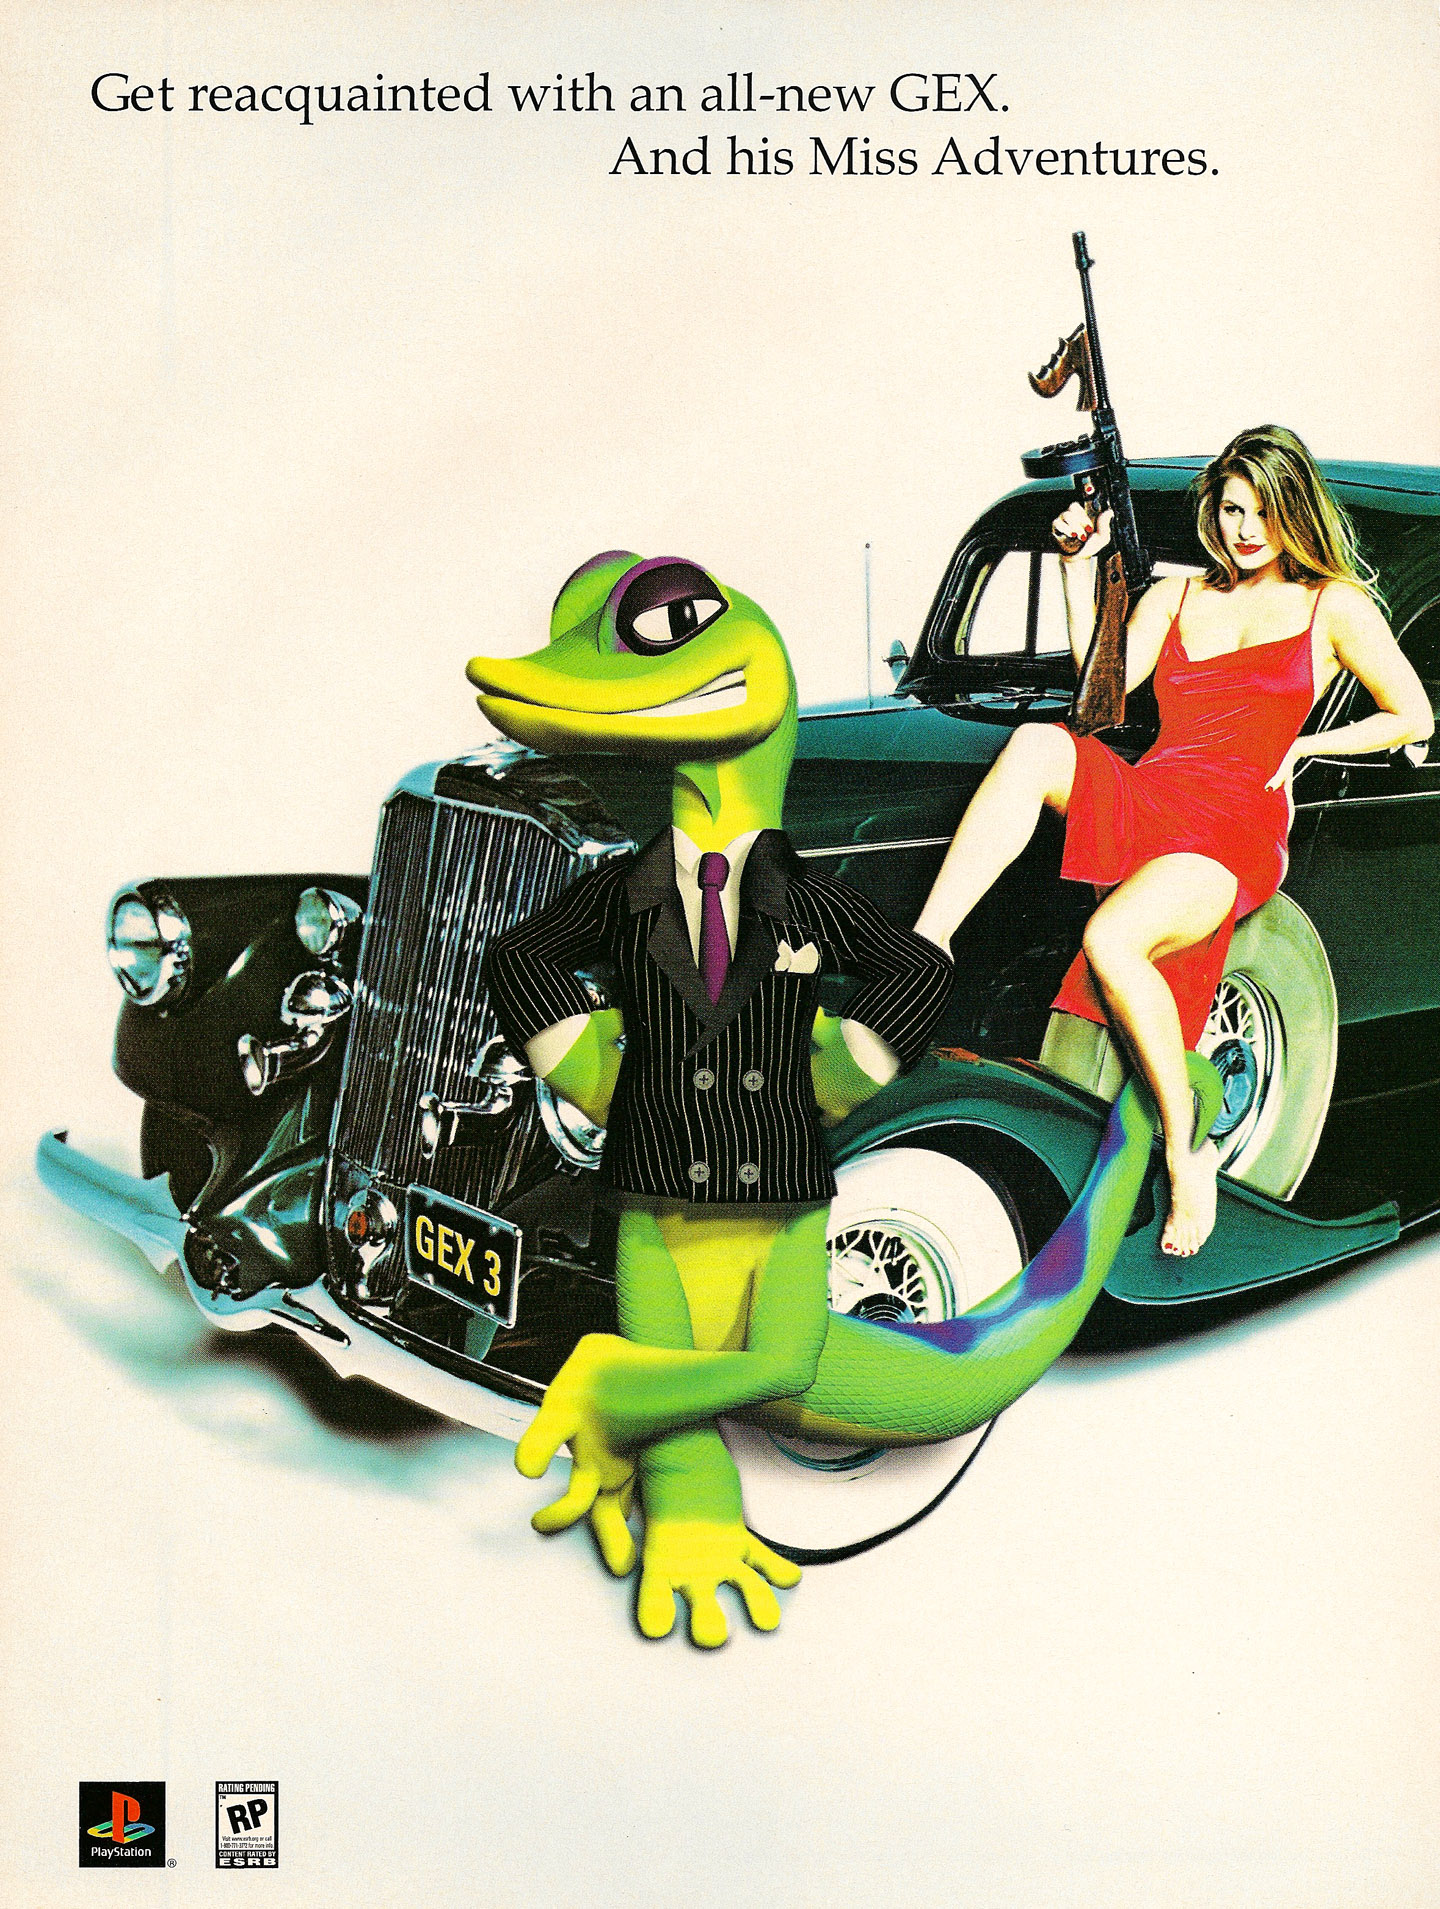 download gex deep cover gecko